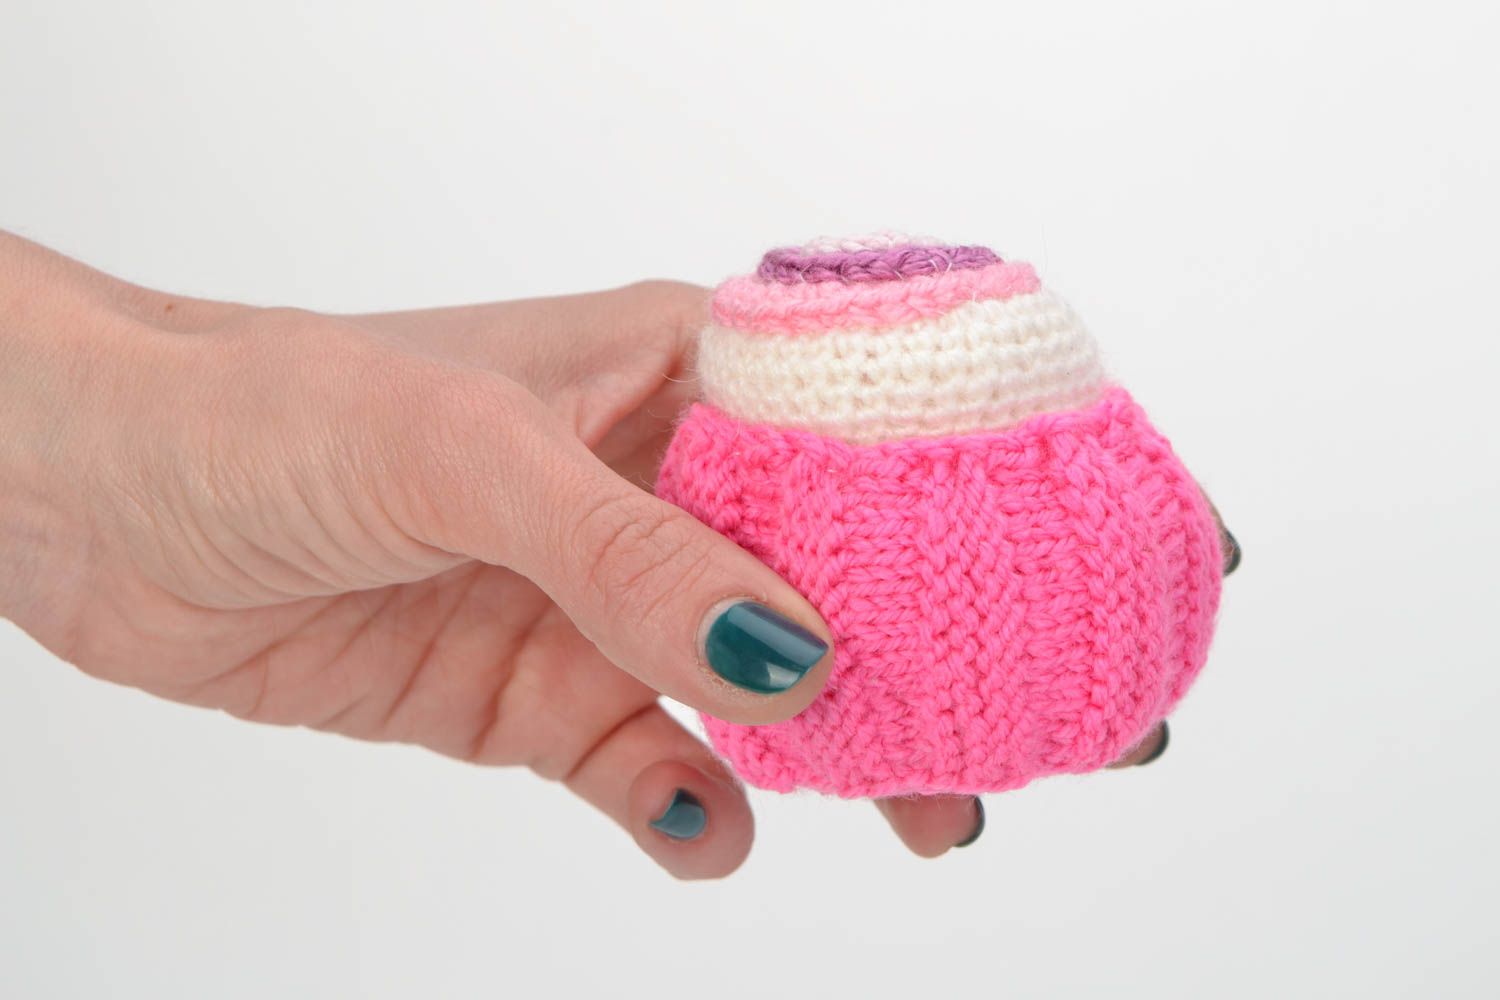 Small pink soft handmade crochet cake for children and home decor photo 2